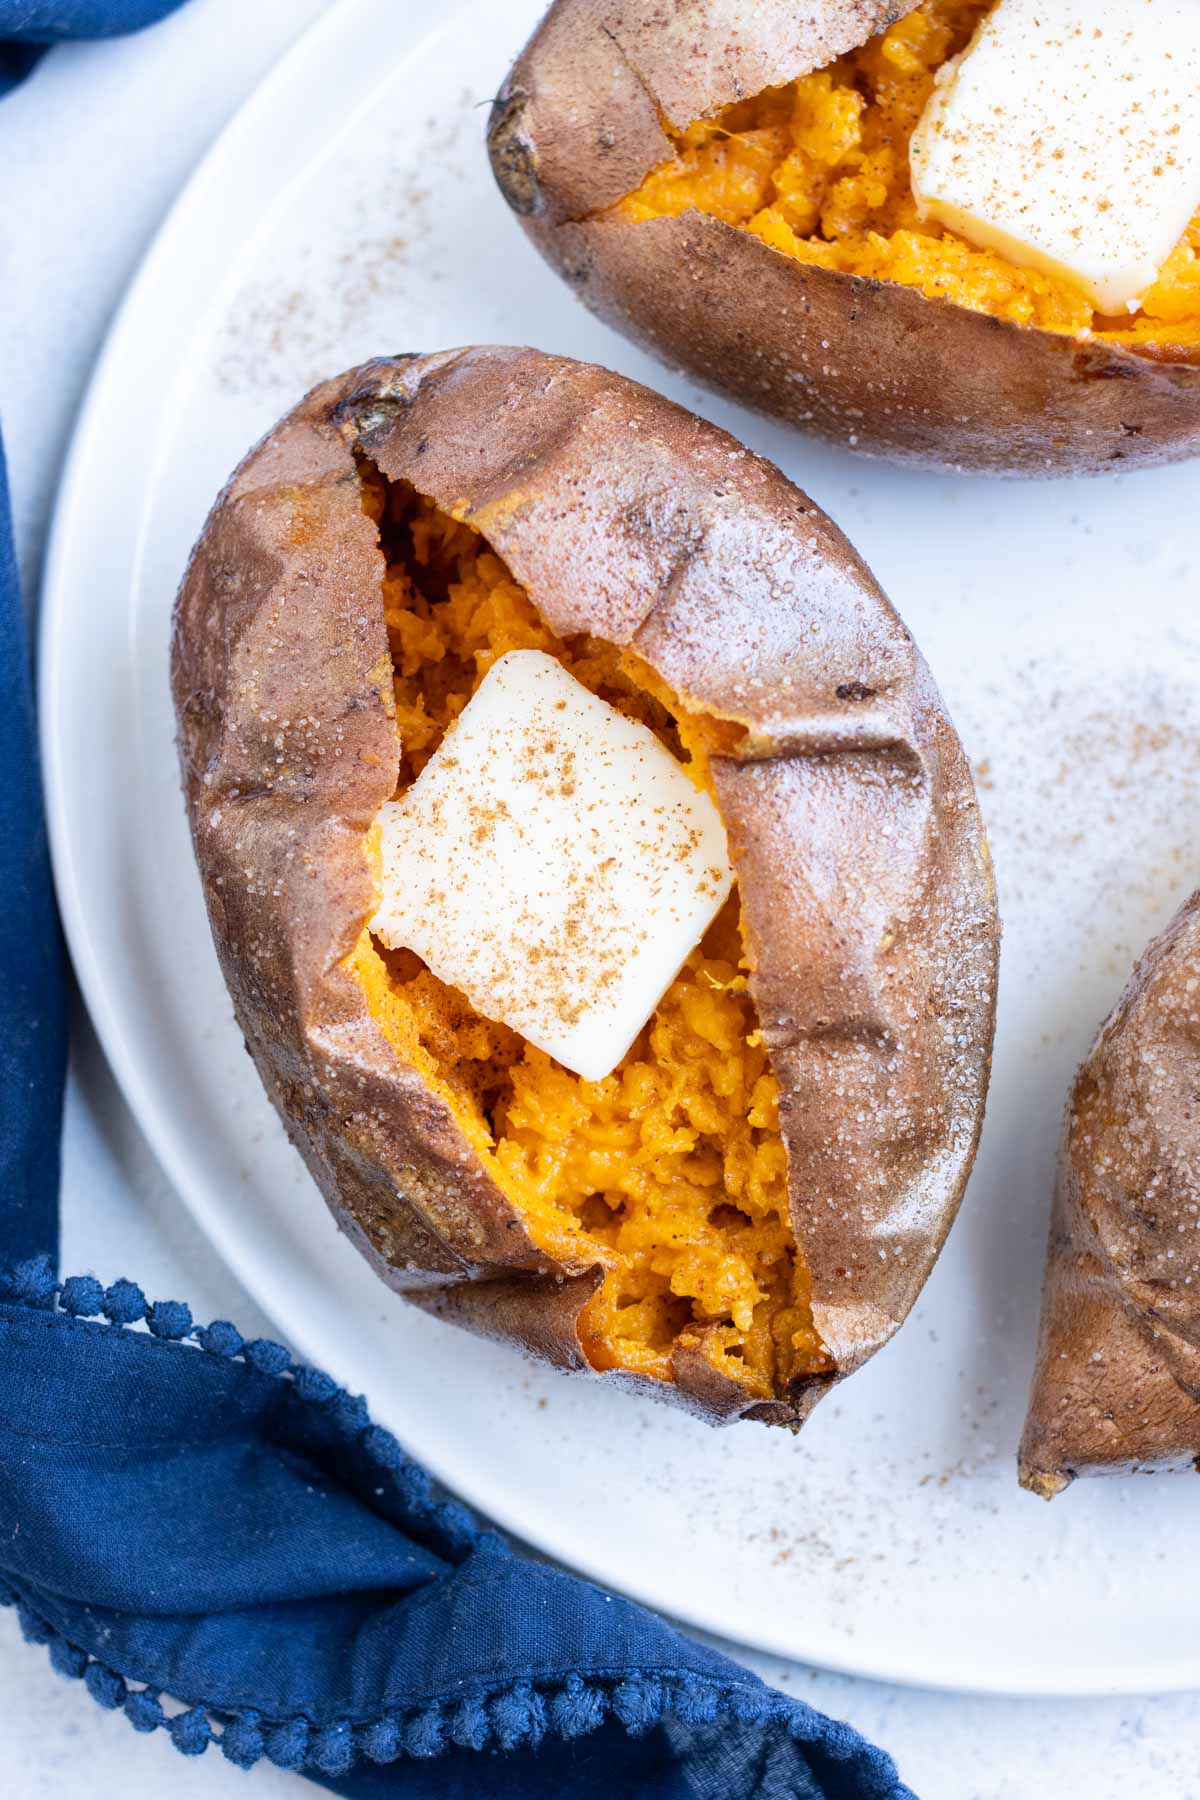 Instant Pot baked sweet potato is a healthy vegetable side dish.